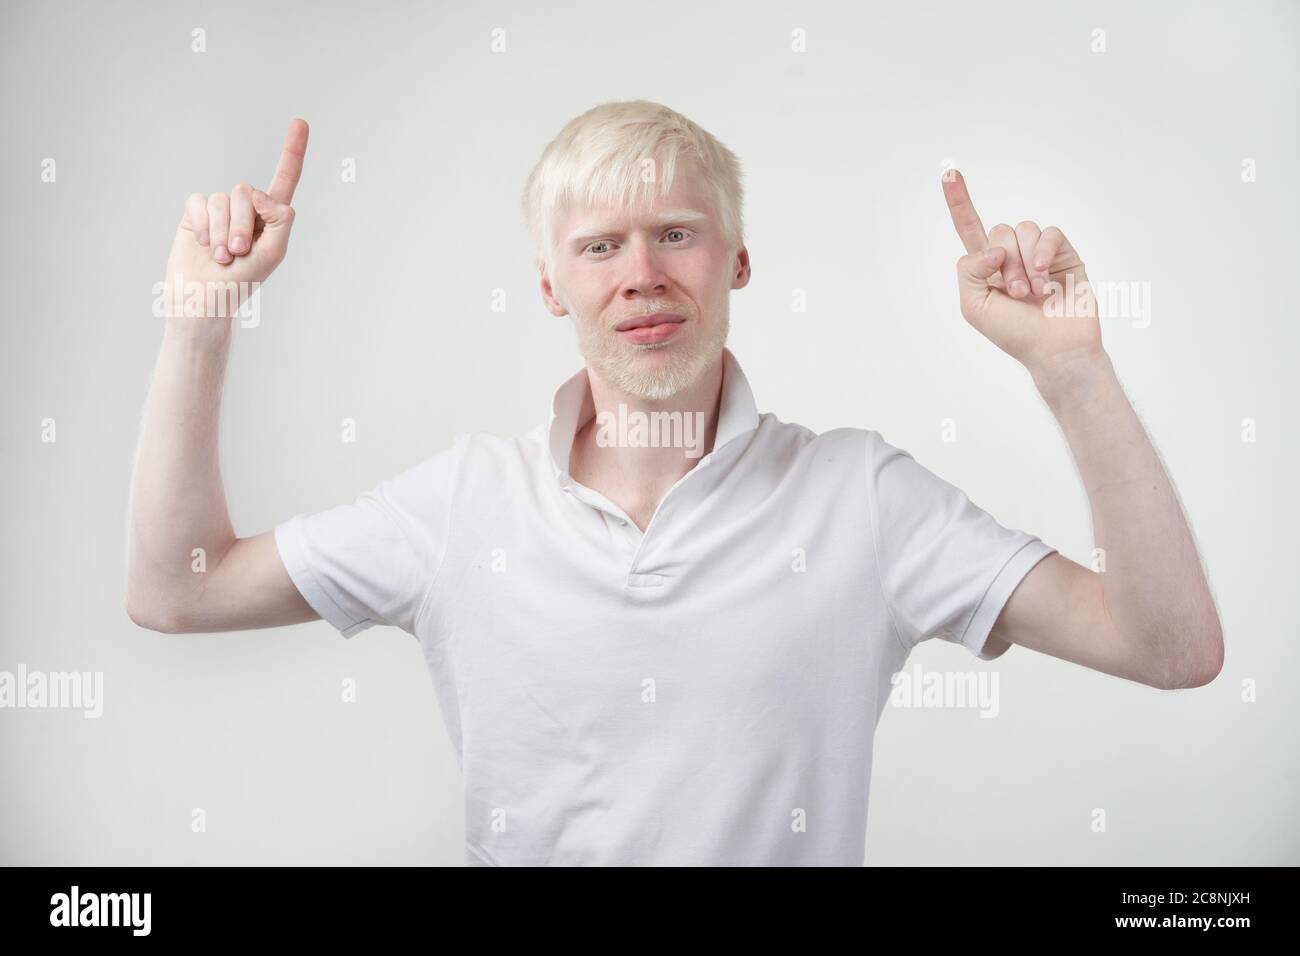 albinism albino man white skin hair studio dressed t-shirt isolated white background abnormal deviations unusual appearance abnormality Beautiful people Shows two fingers up. Stock Photo